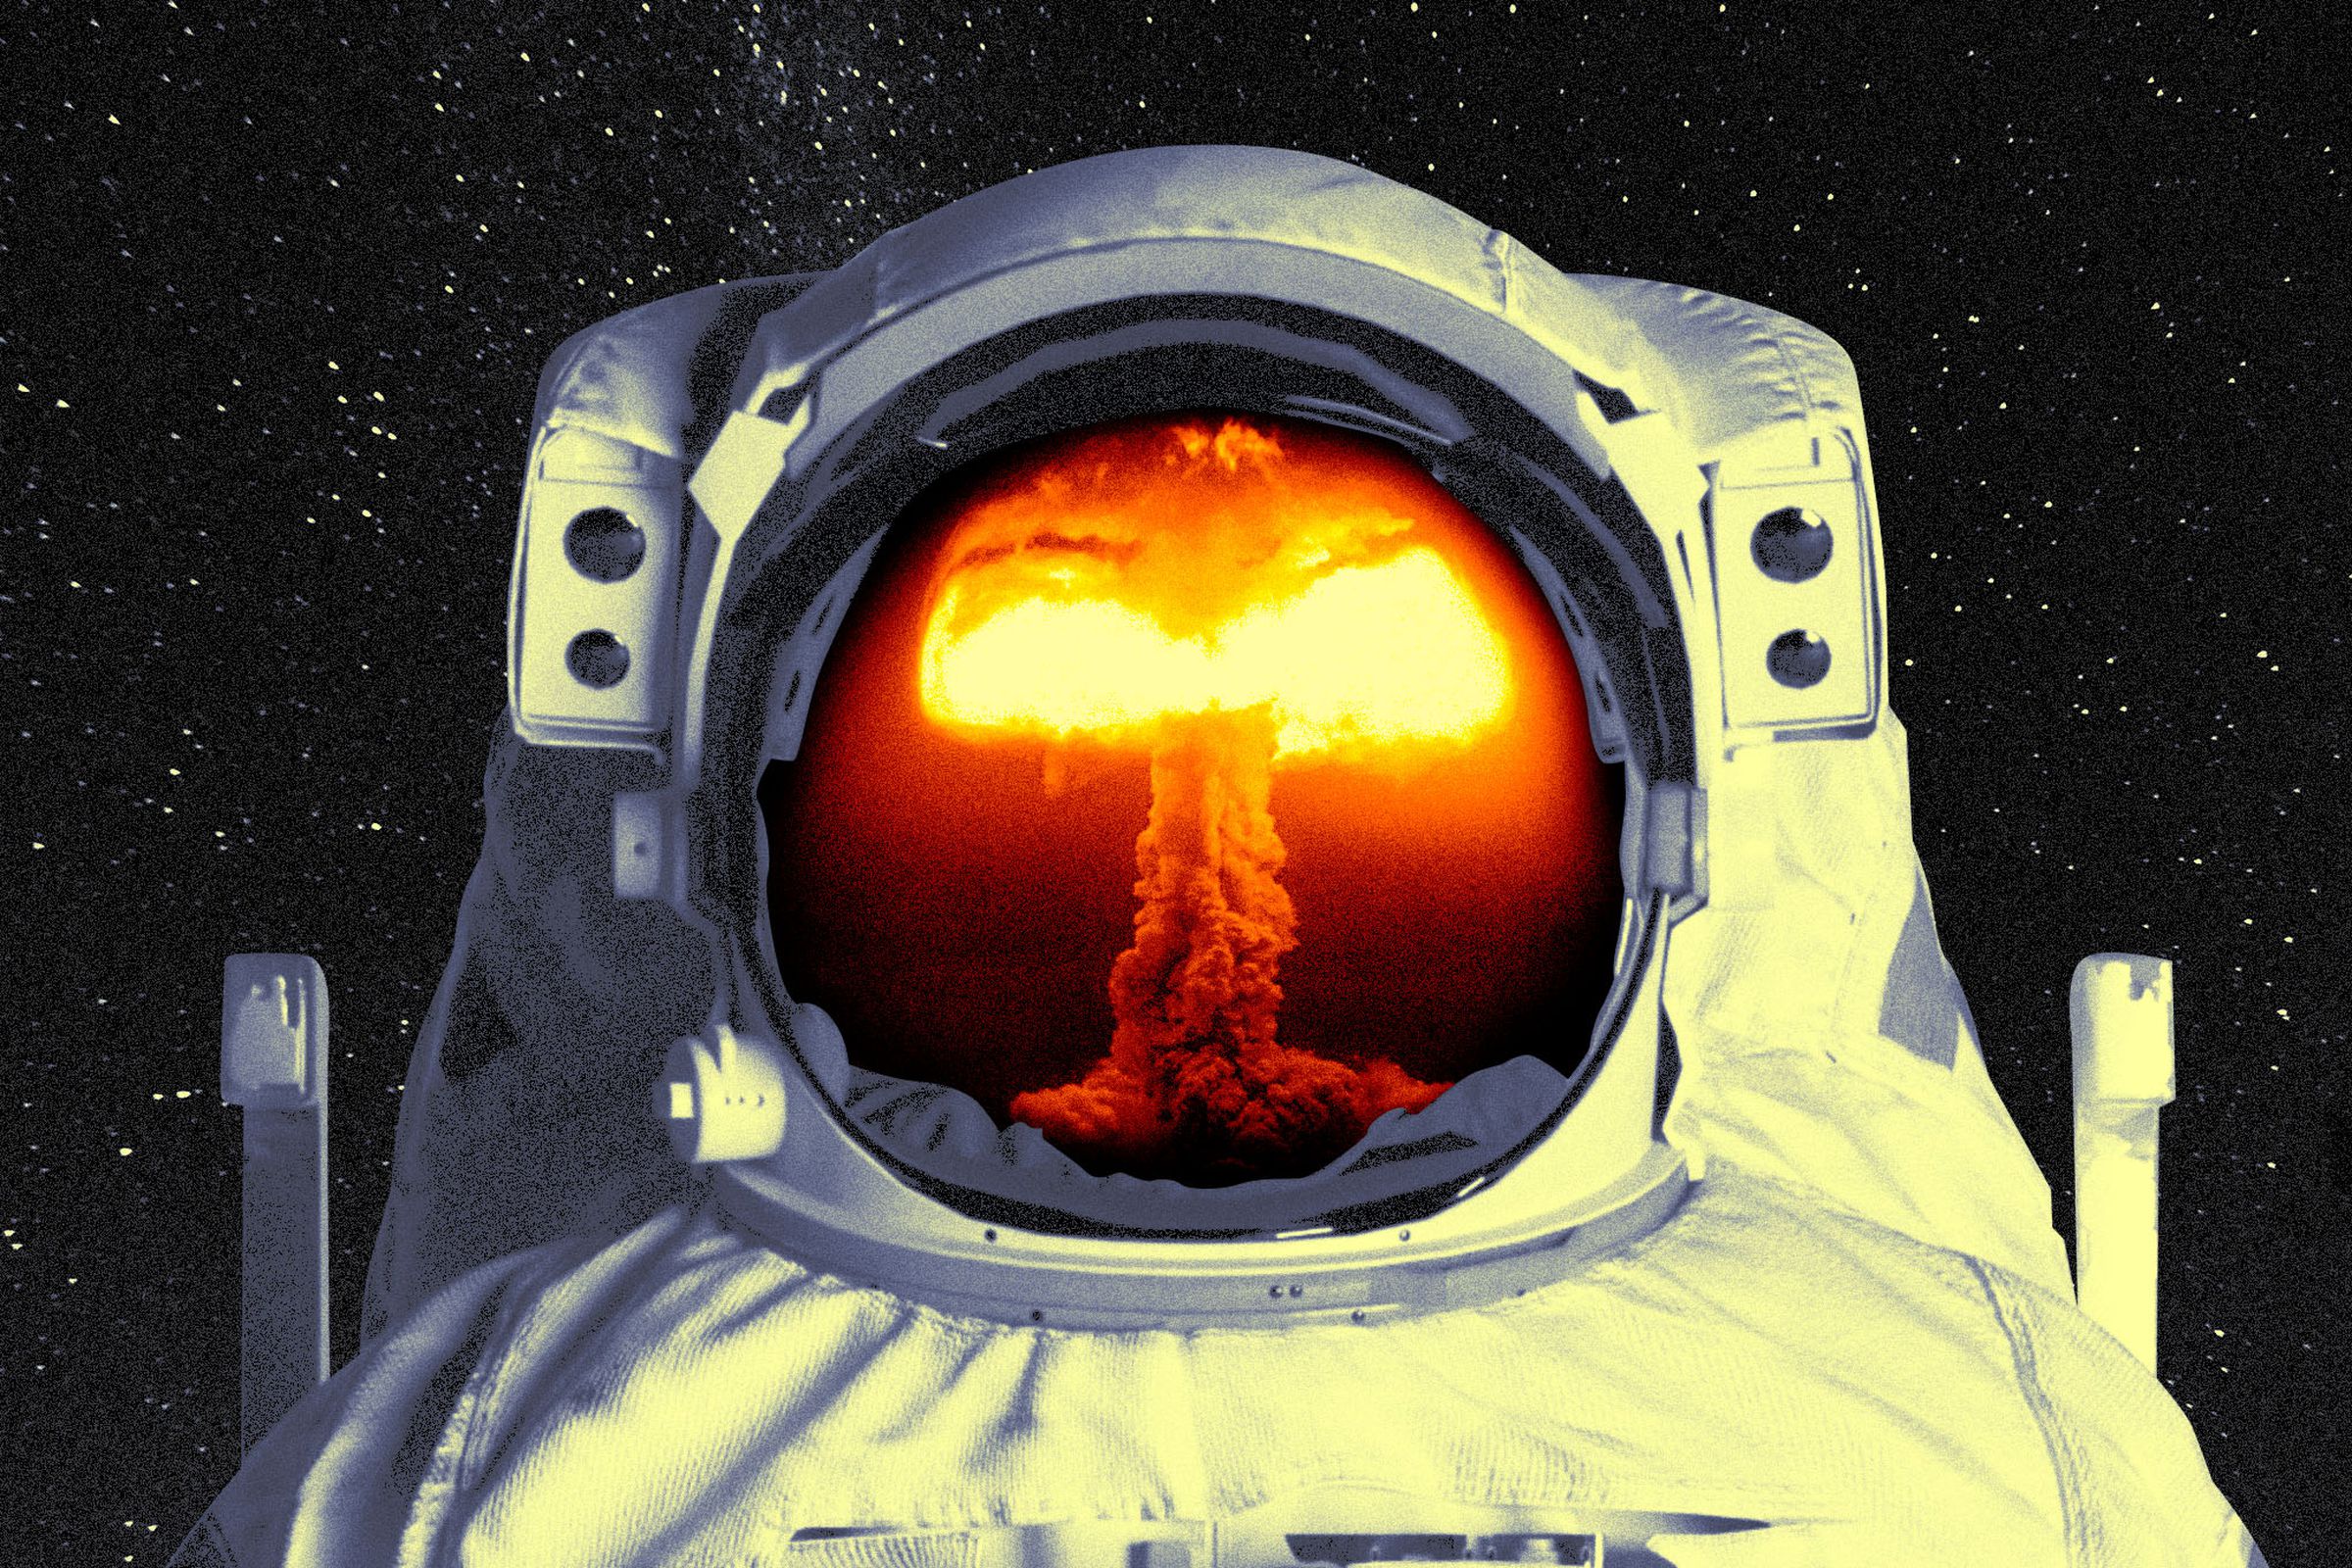 Photo collage of an astronaut with the reflection of a mushroom cloud in their helmet.